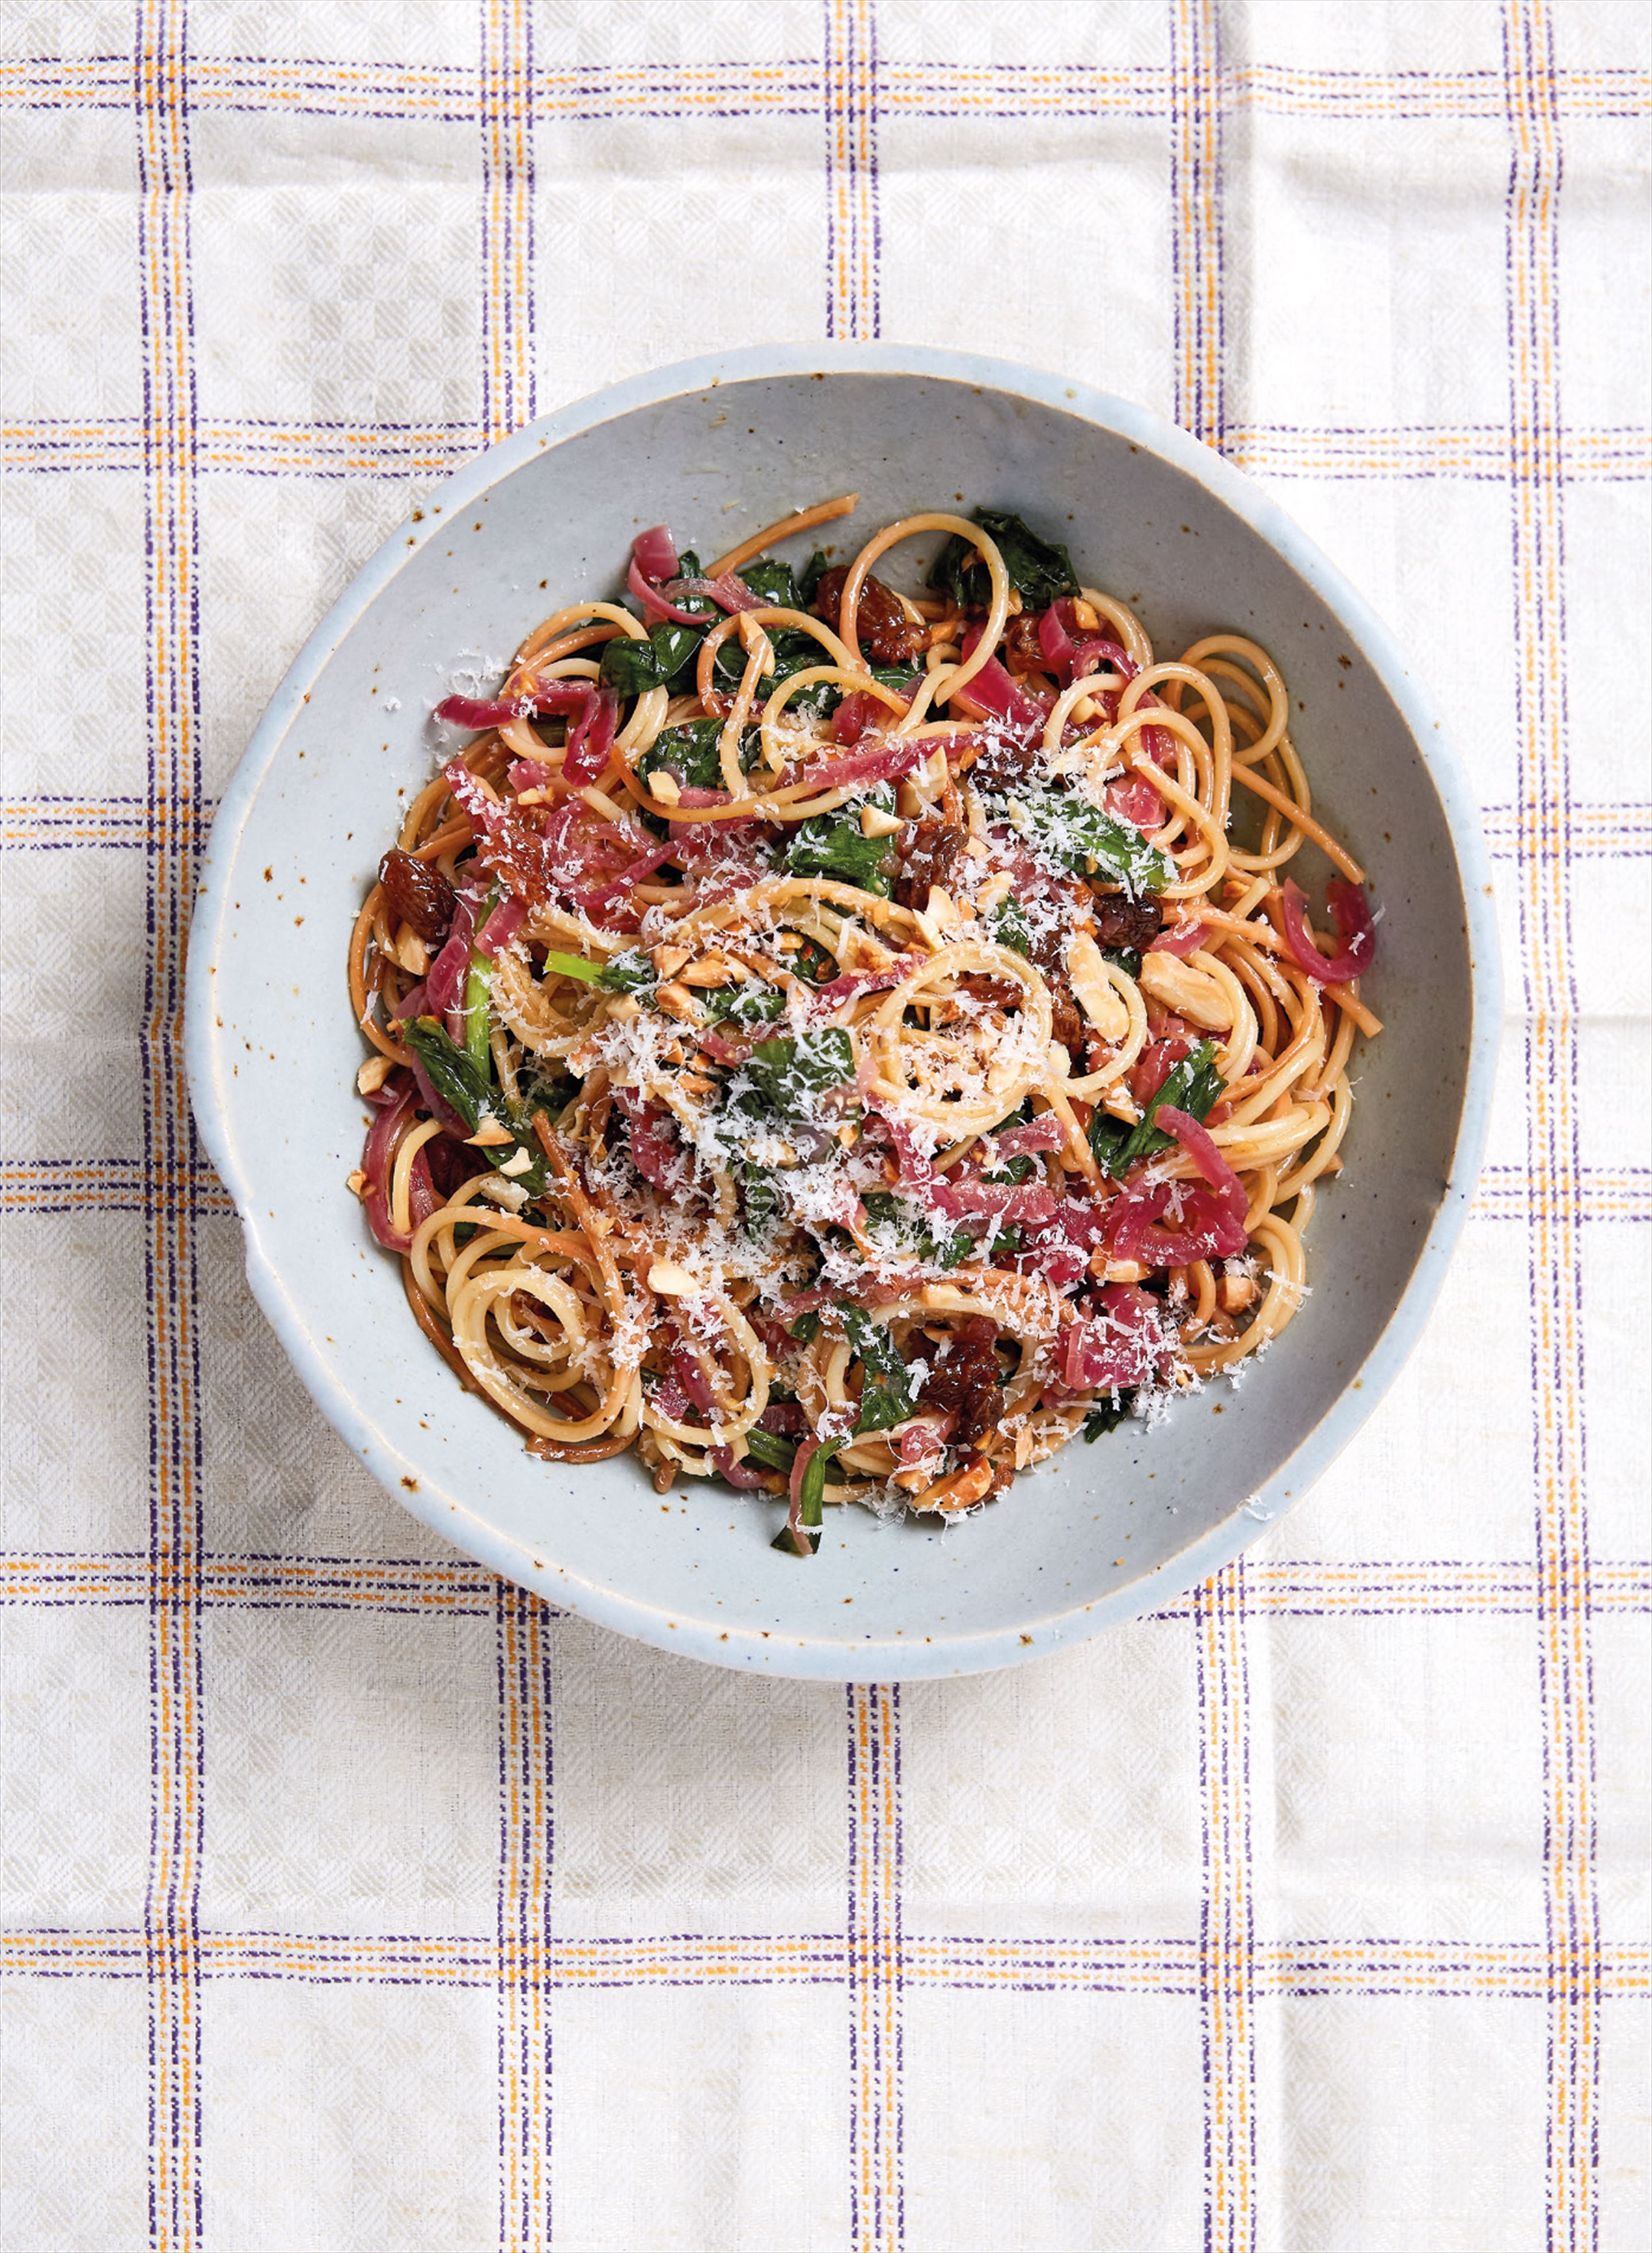 Toasted spaghetti with red onions, almonds and raisins